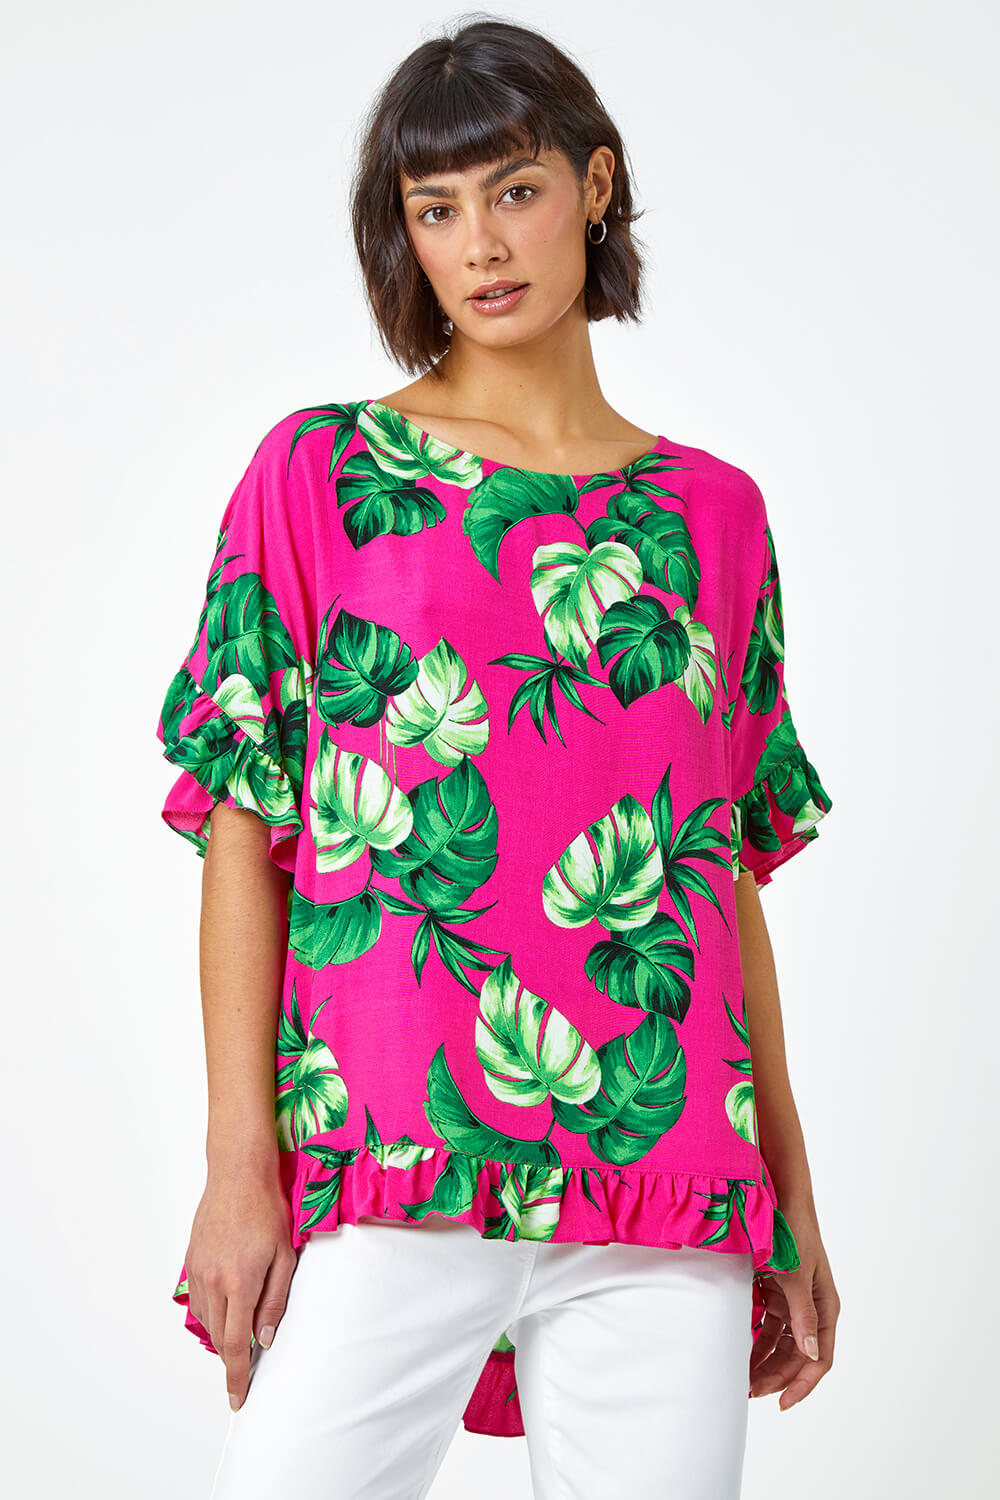 PINK Palm Print Frill Detail Oversized Top, Image 2 of 5